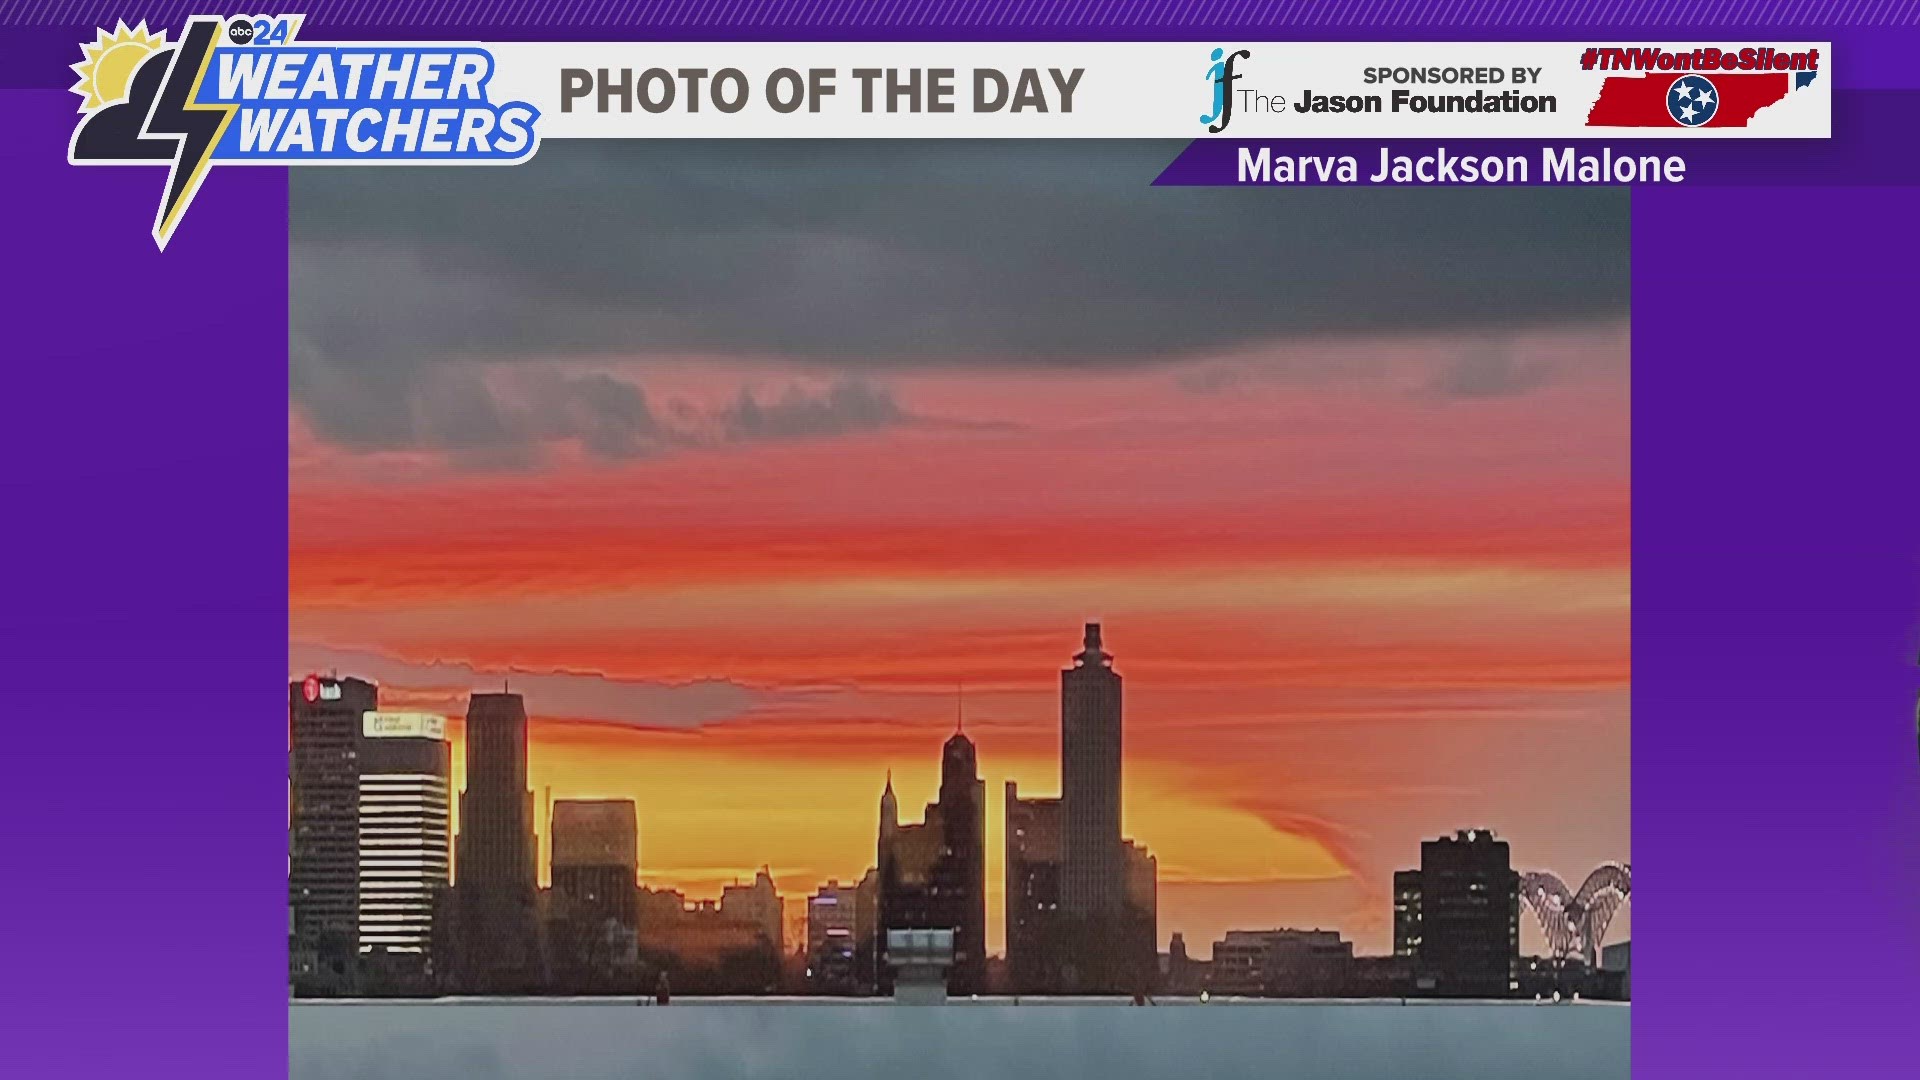 Chief Meteorologist Danielle Moss shares the photo of the day.